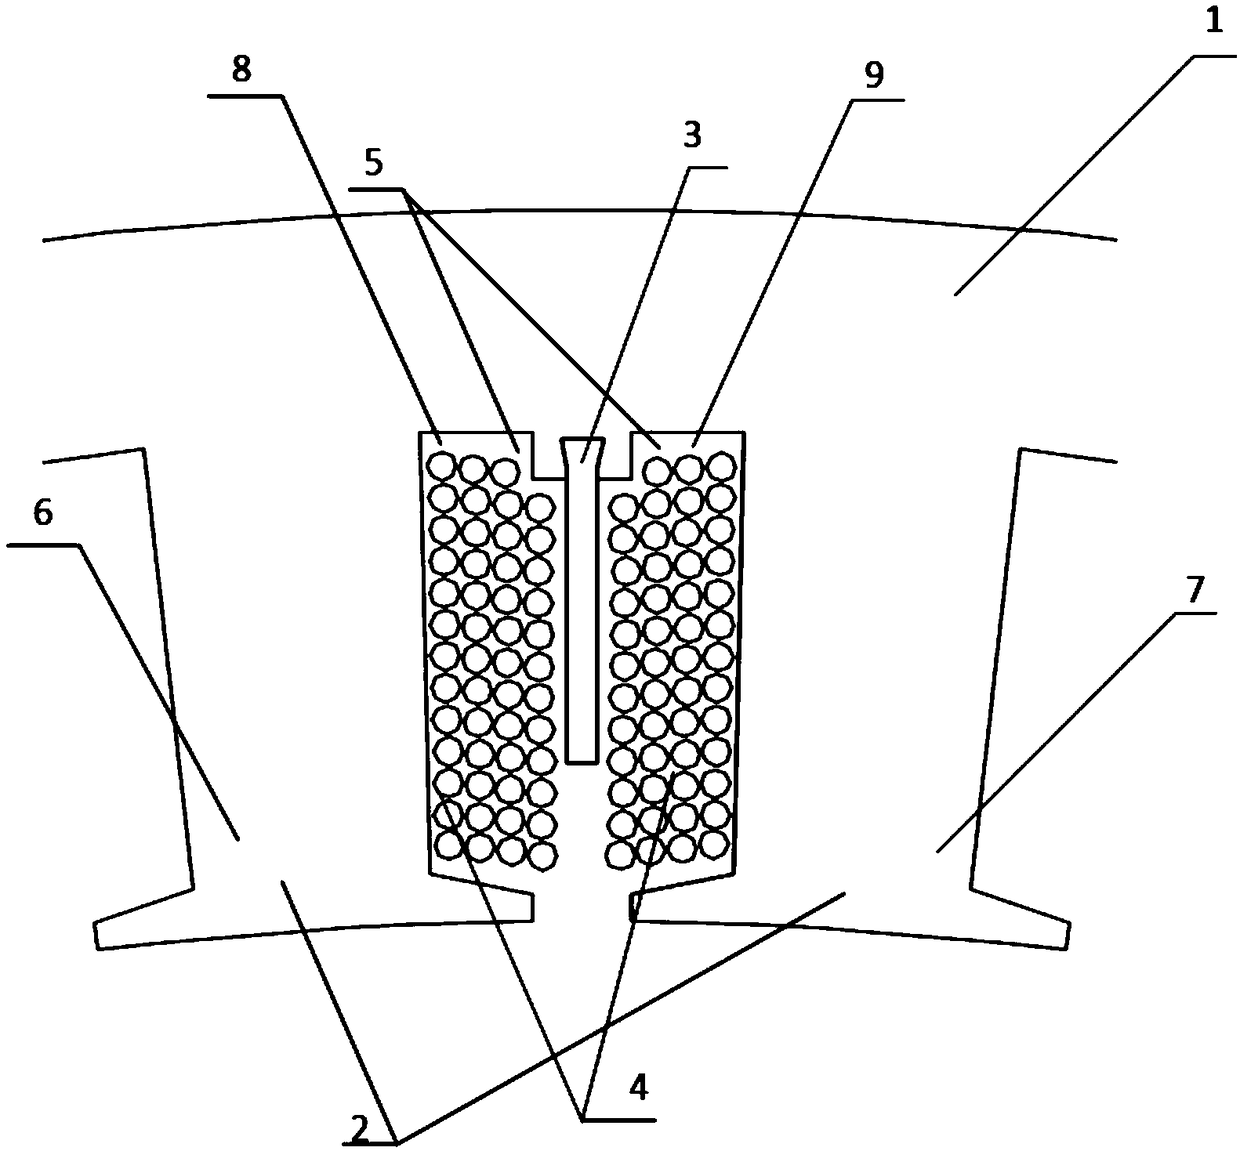 Motor stator structure with auxiliary cooling teeth, and motor